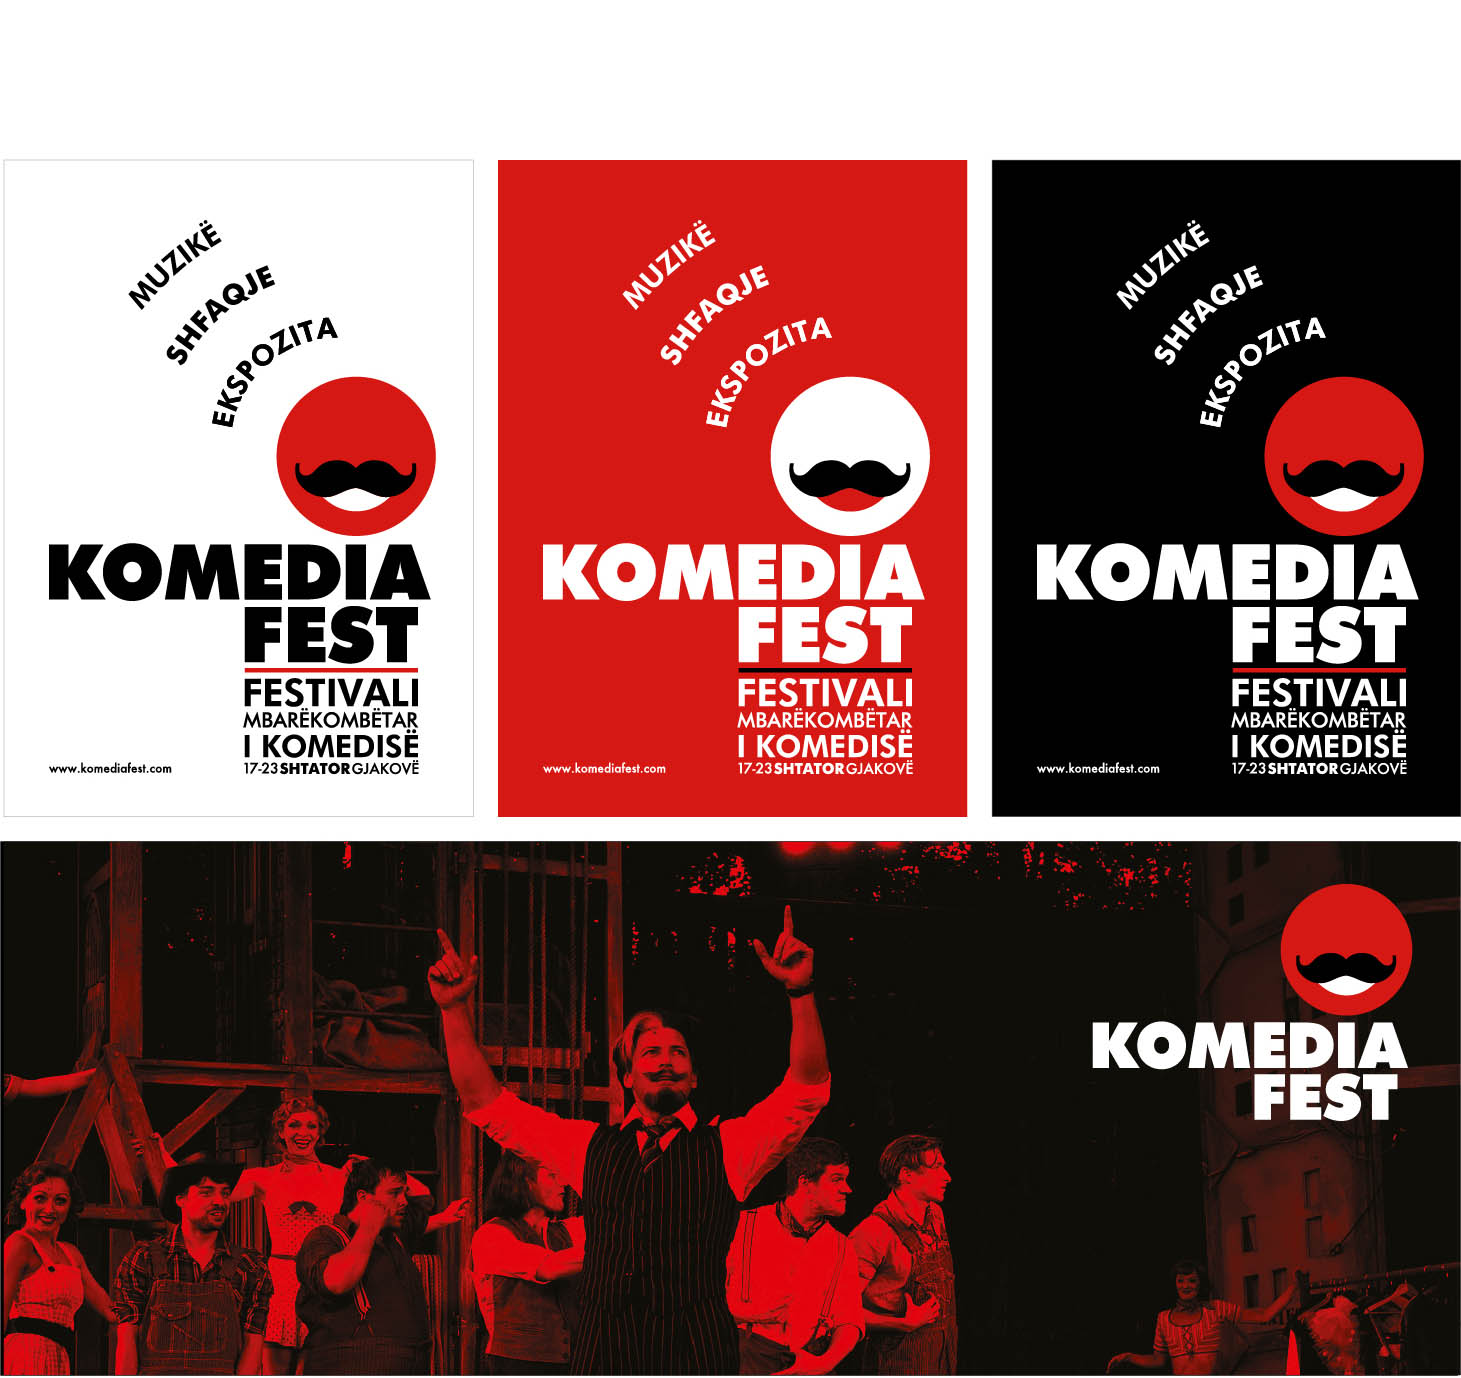 Brand launch and teaser campaign for Komedia Fest